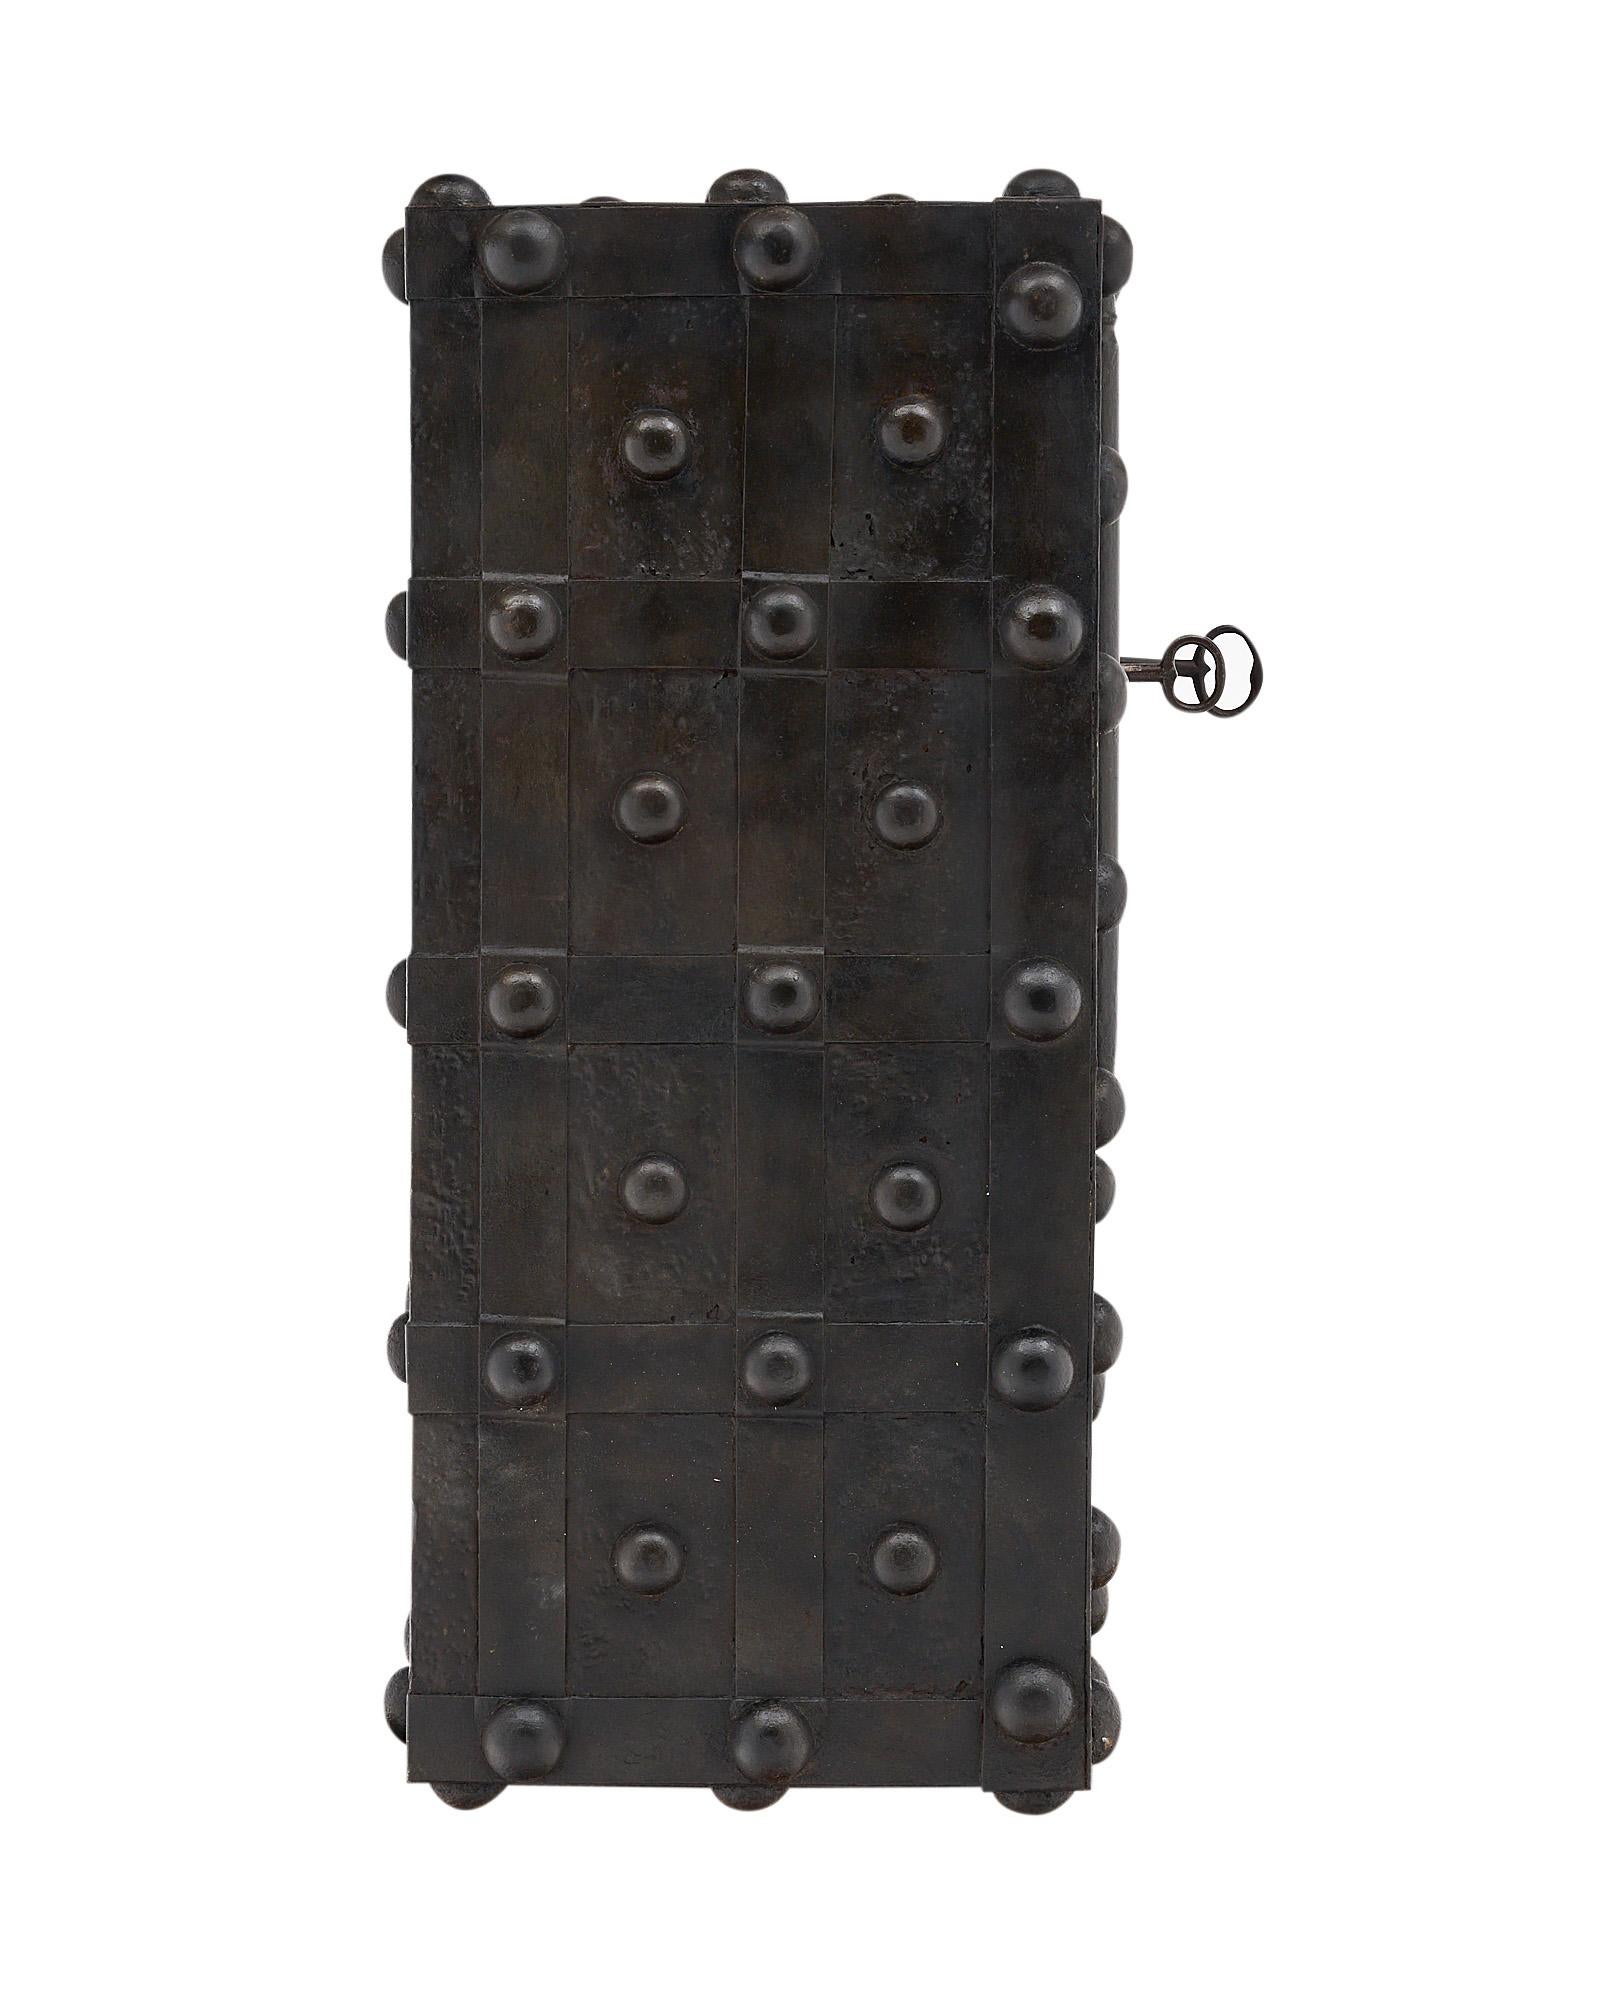 The wrought iron safe is decorated with nail head motifs on all four sides and has an all-original; working mechanism. The front door features two large hinges on the sides. The inside opens to reveal an amazing lock mechanism with three keys and a